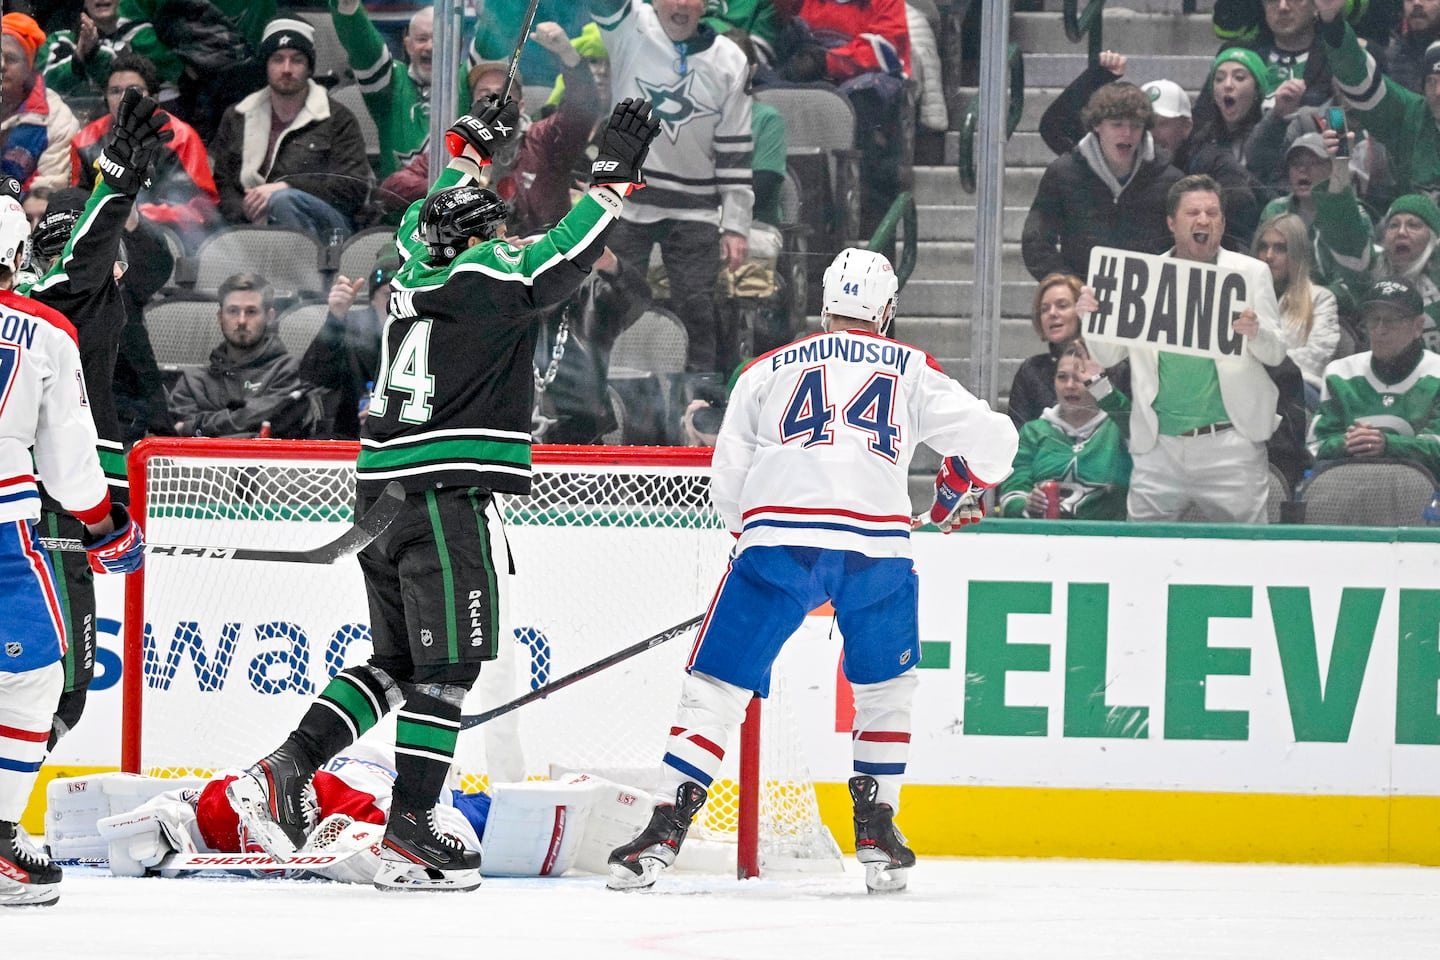 Loss of 4 to 2 against the Stars: indiscipline sinks the CH in Dallas